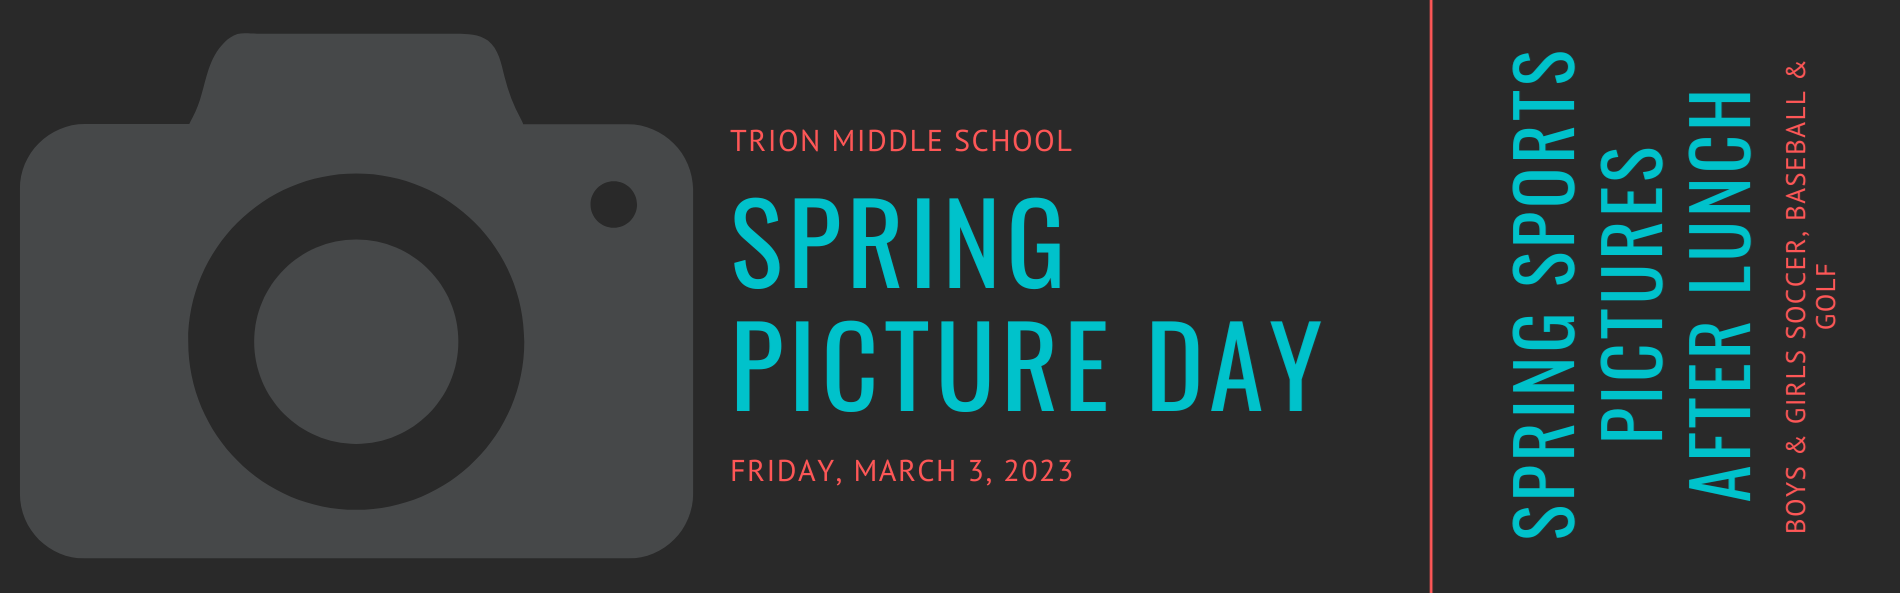 Spring Pictures & Spring Sports (B&G Soccer, Baseball, Golf) Pictures Fri, Mar 3rd